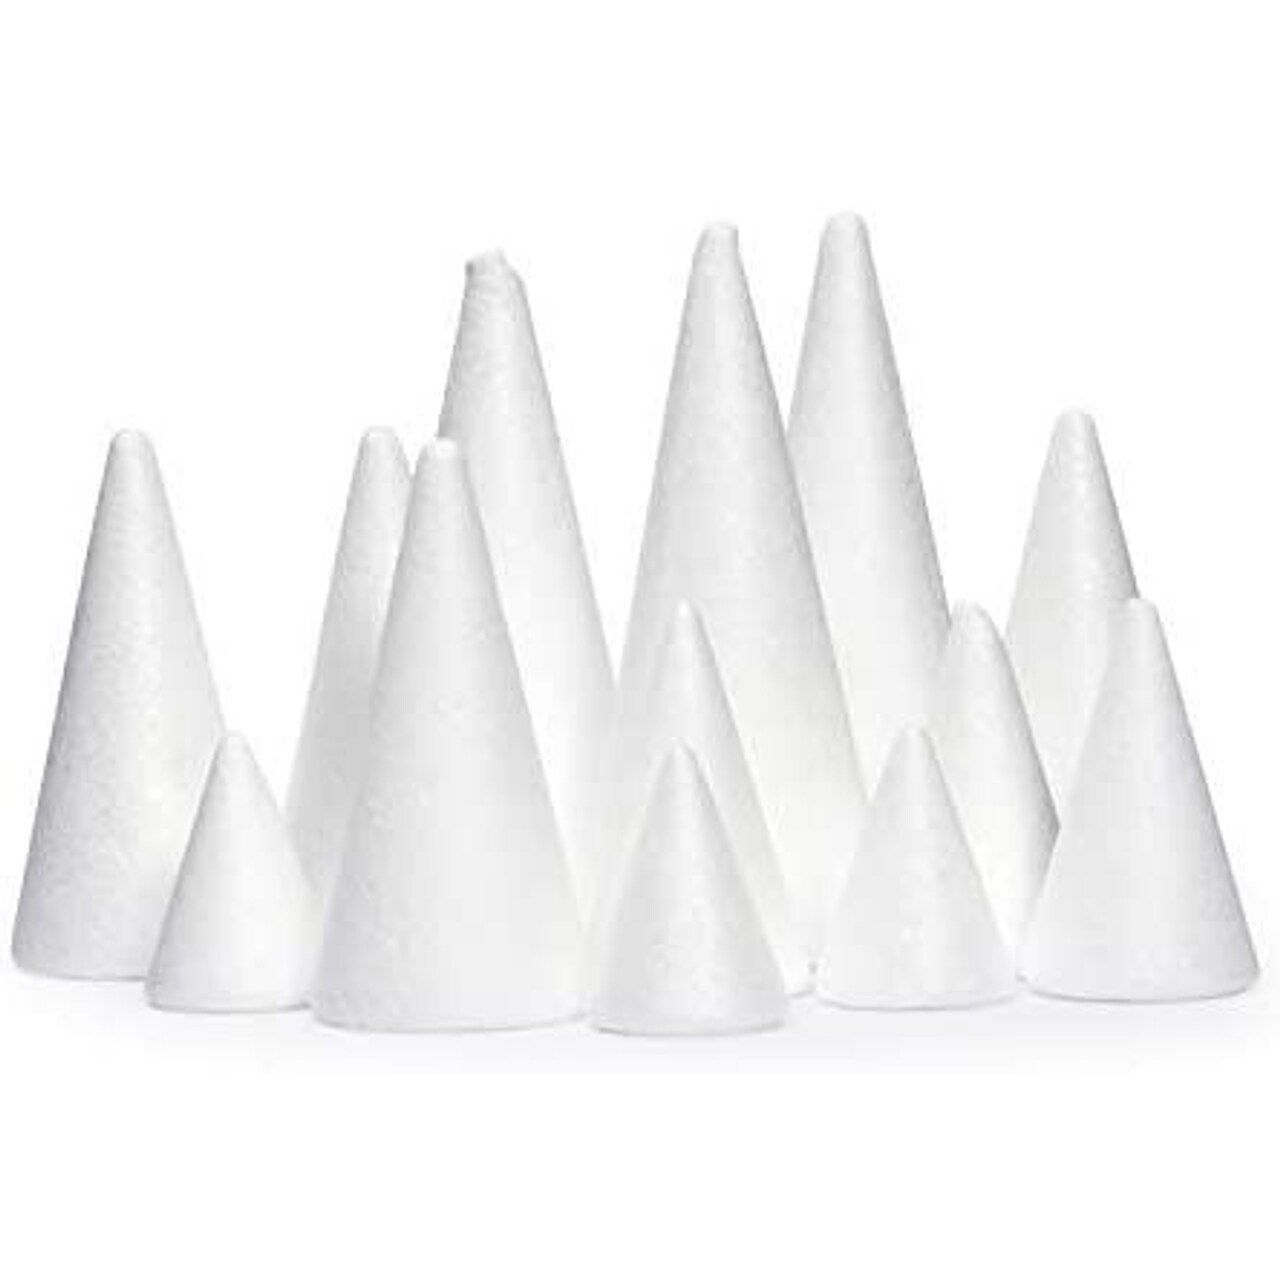 White Foam Cones for Crafts, 4 Assorted Sizes (2.3-6 In, 16 Pack)